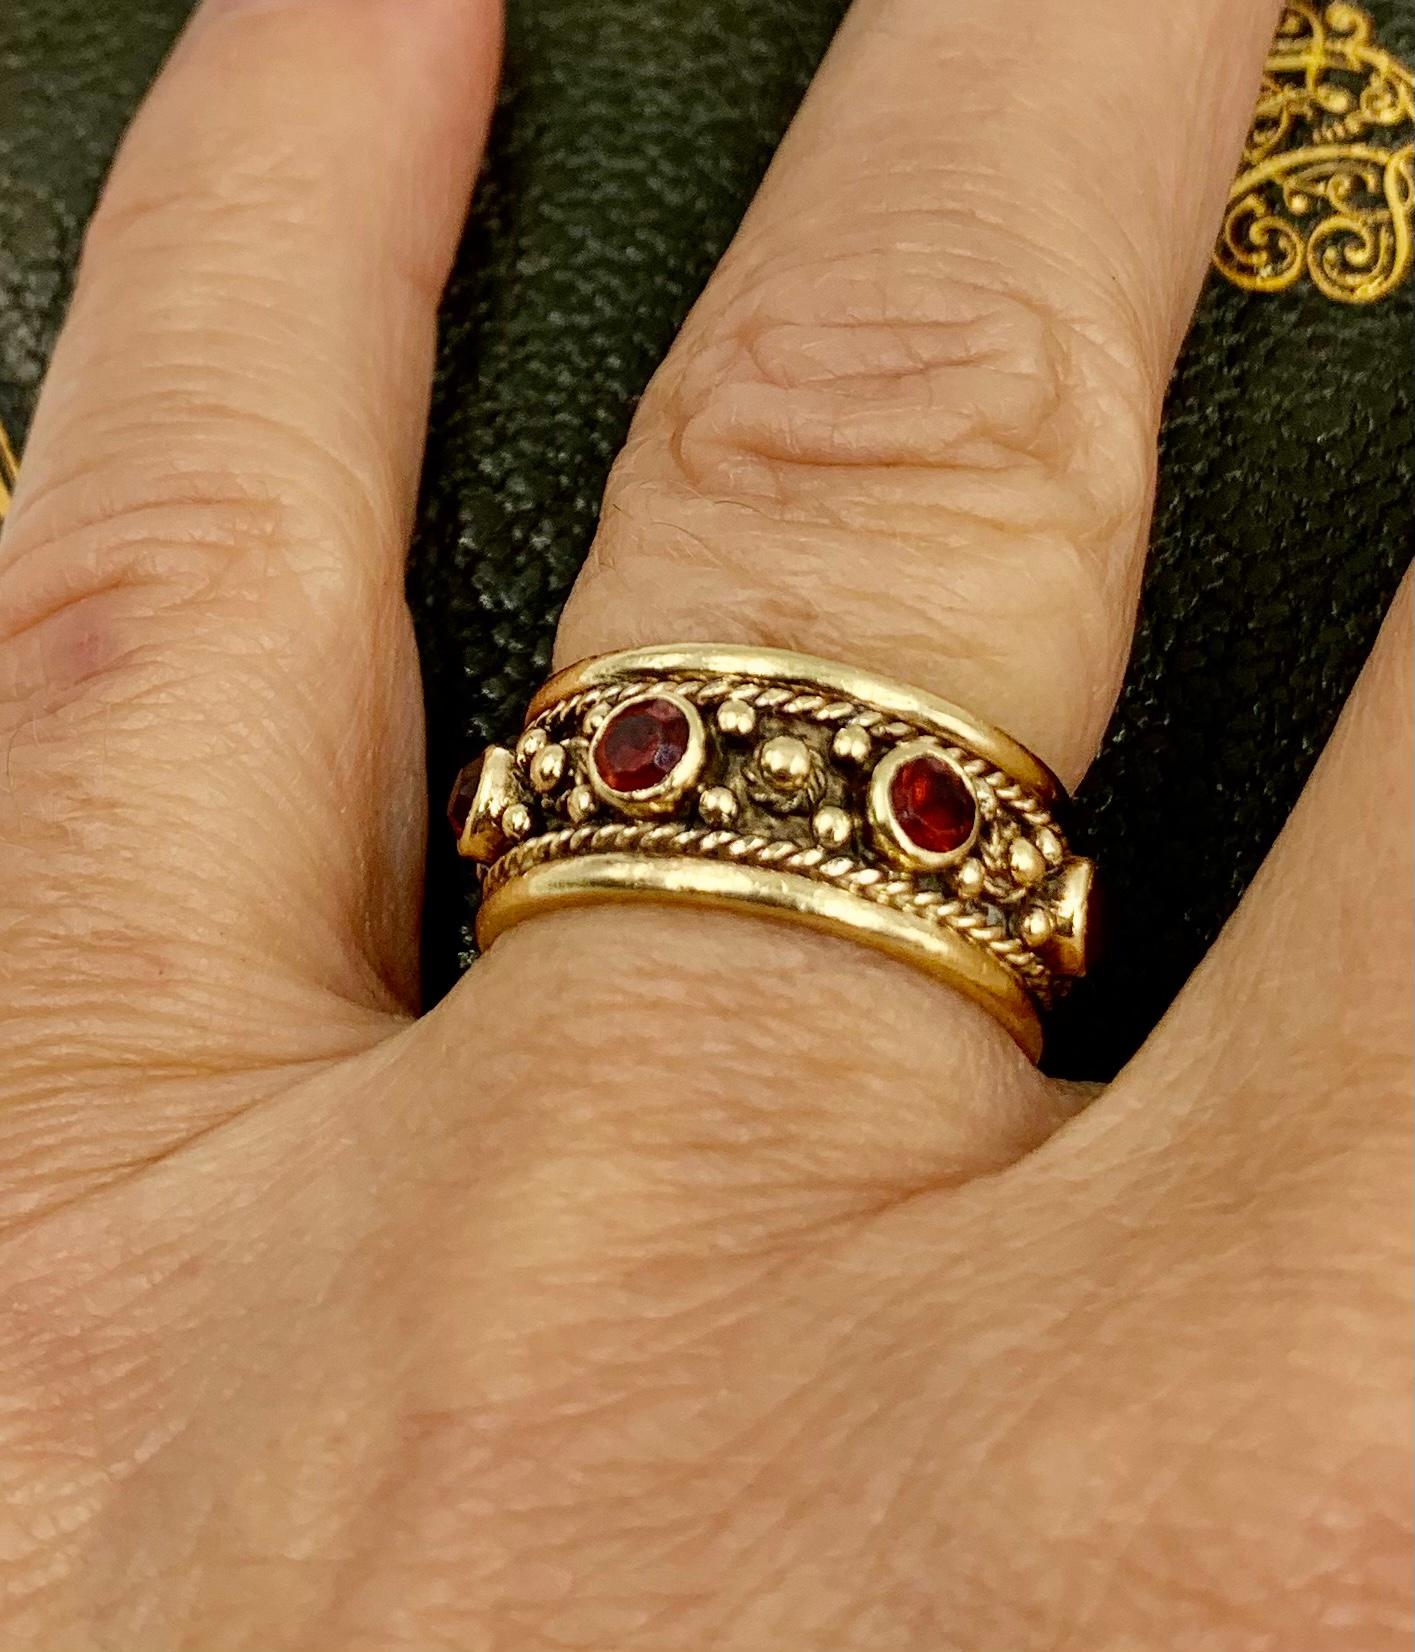 Ornate Renaissance style 14K yellow gold garnet set band ring
Late 19th Century
Marks: Marker's mark A within a shield, 14K
Technique: Twisted gold wire work, granulation, cullet set gemstones
Size: 5.75 US
Very Good Condition

Very fine quality,